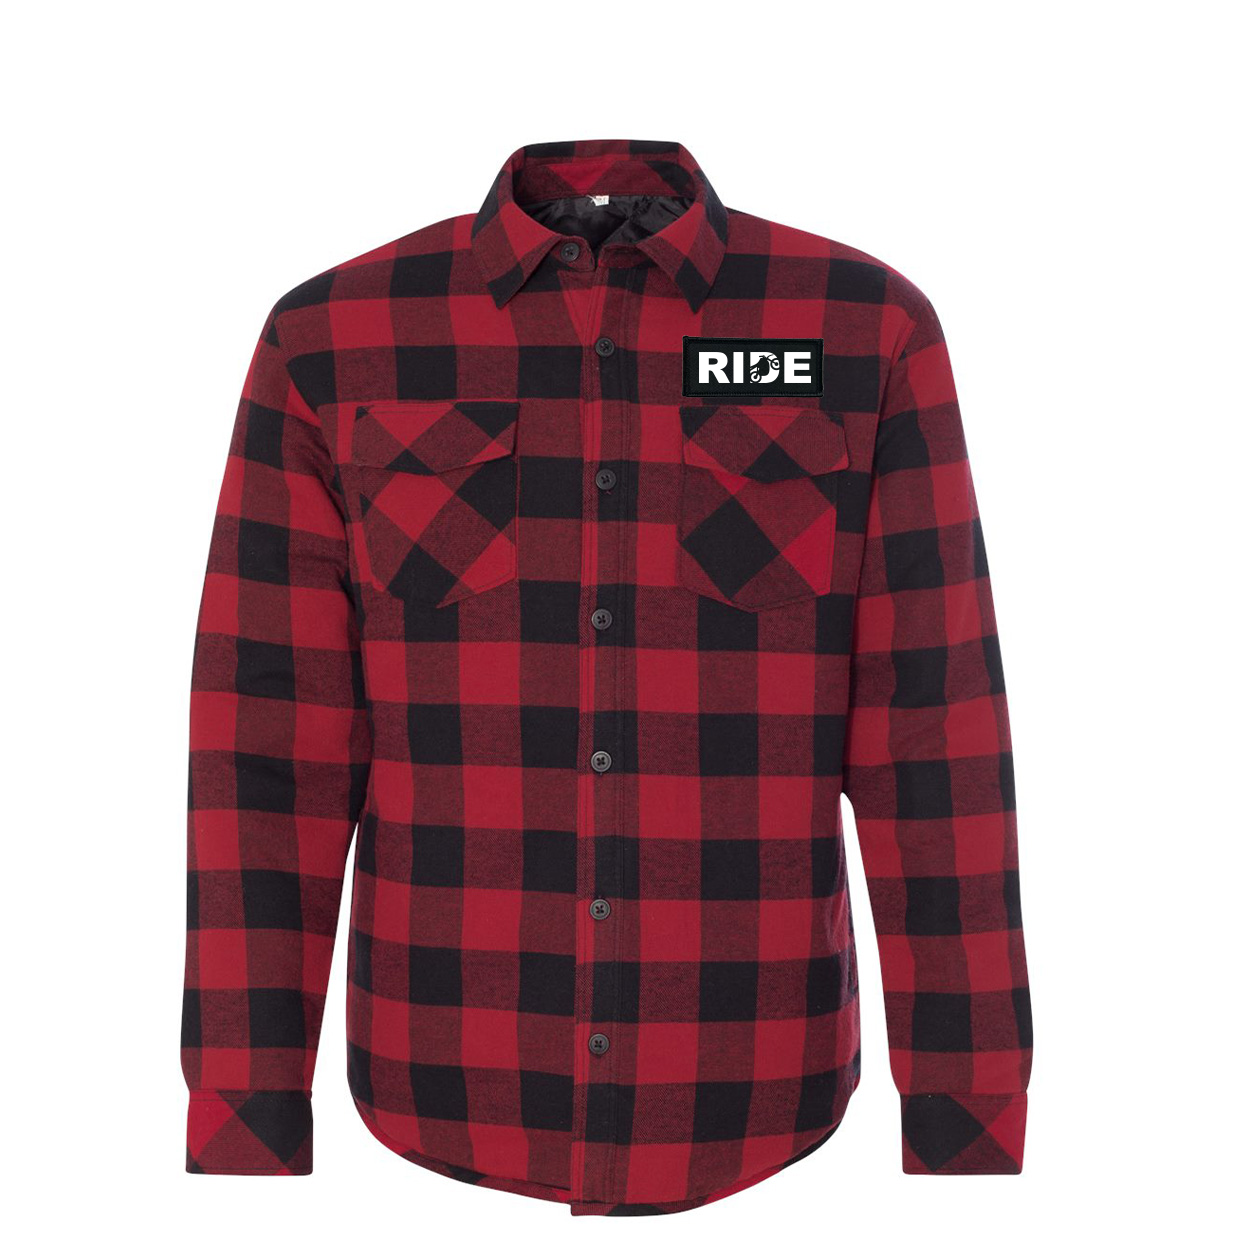 Ride Moto Logo Classic Unisex Woven Patch Quilted Button Flannel Jacket Red/Black Buffalo (White Logo)